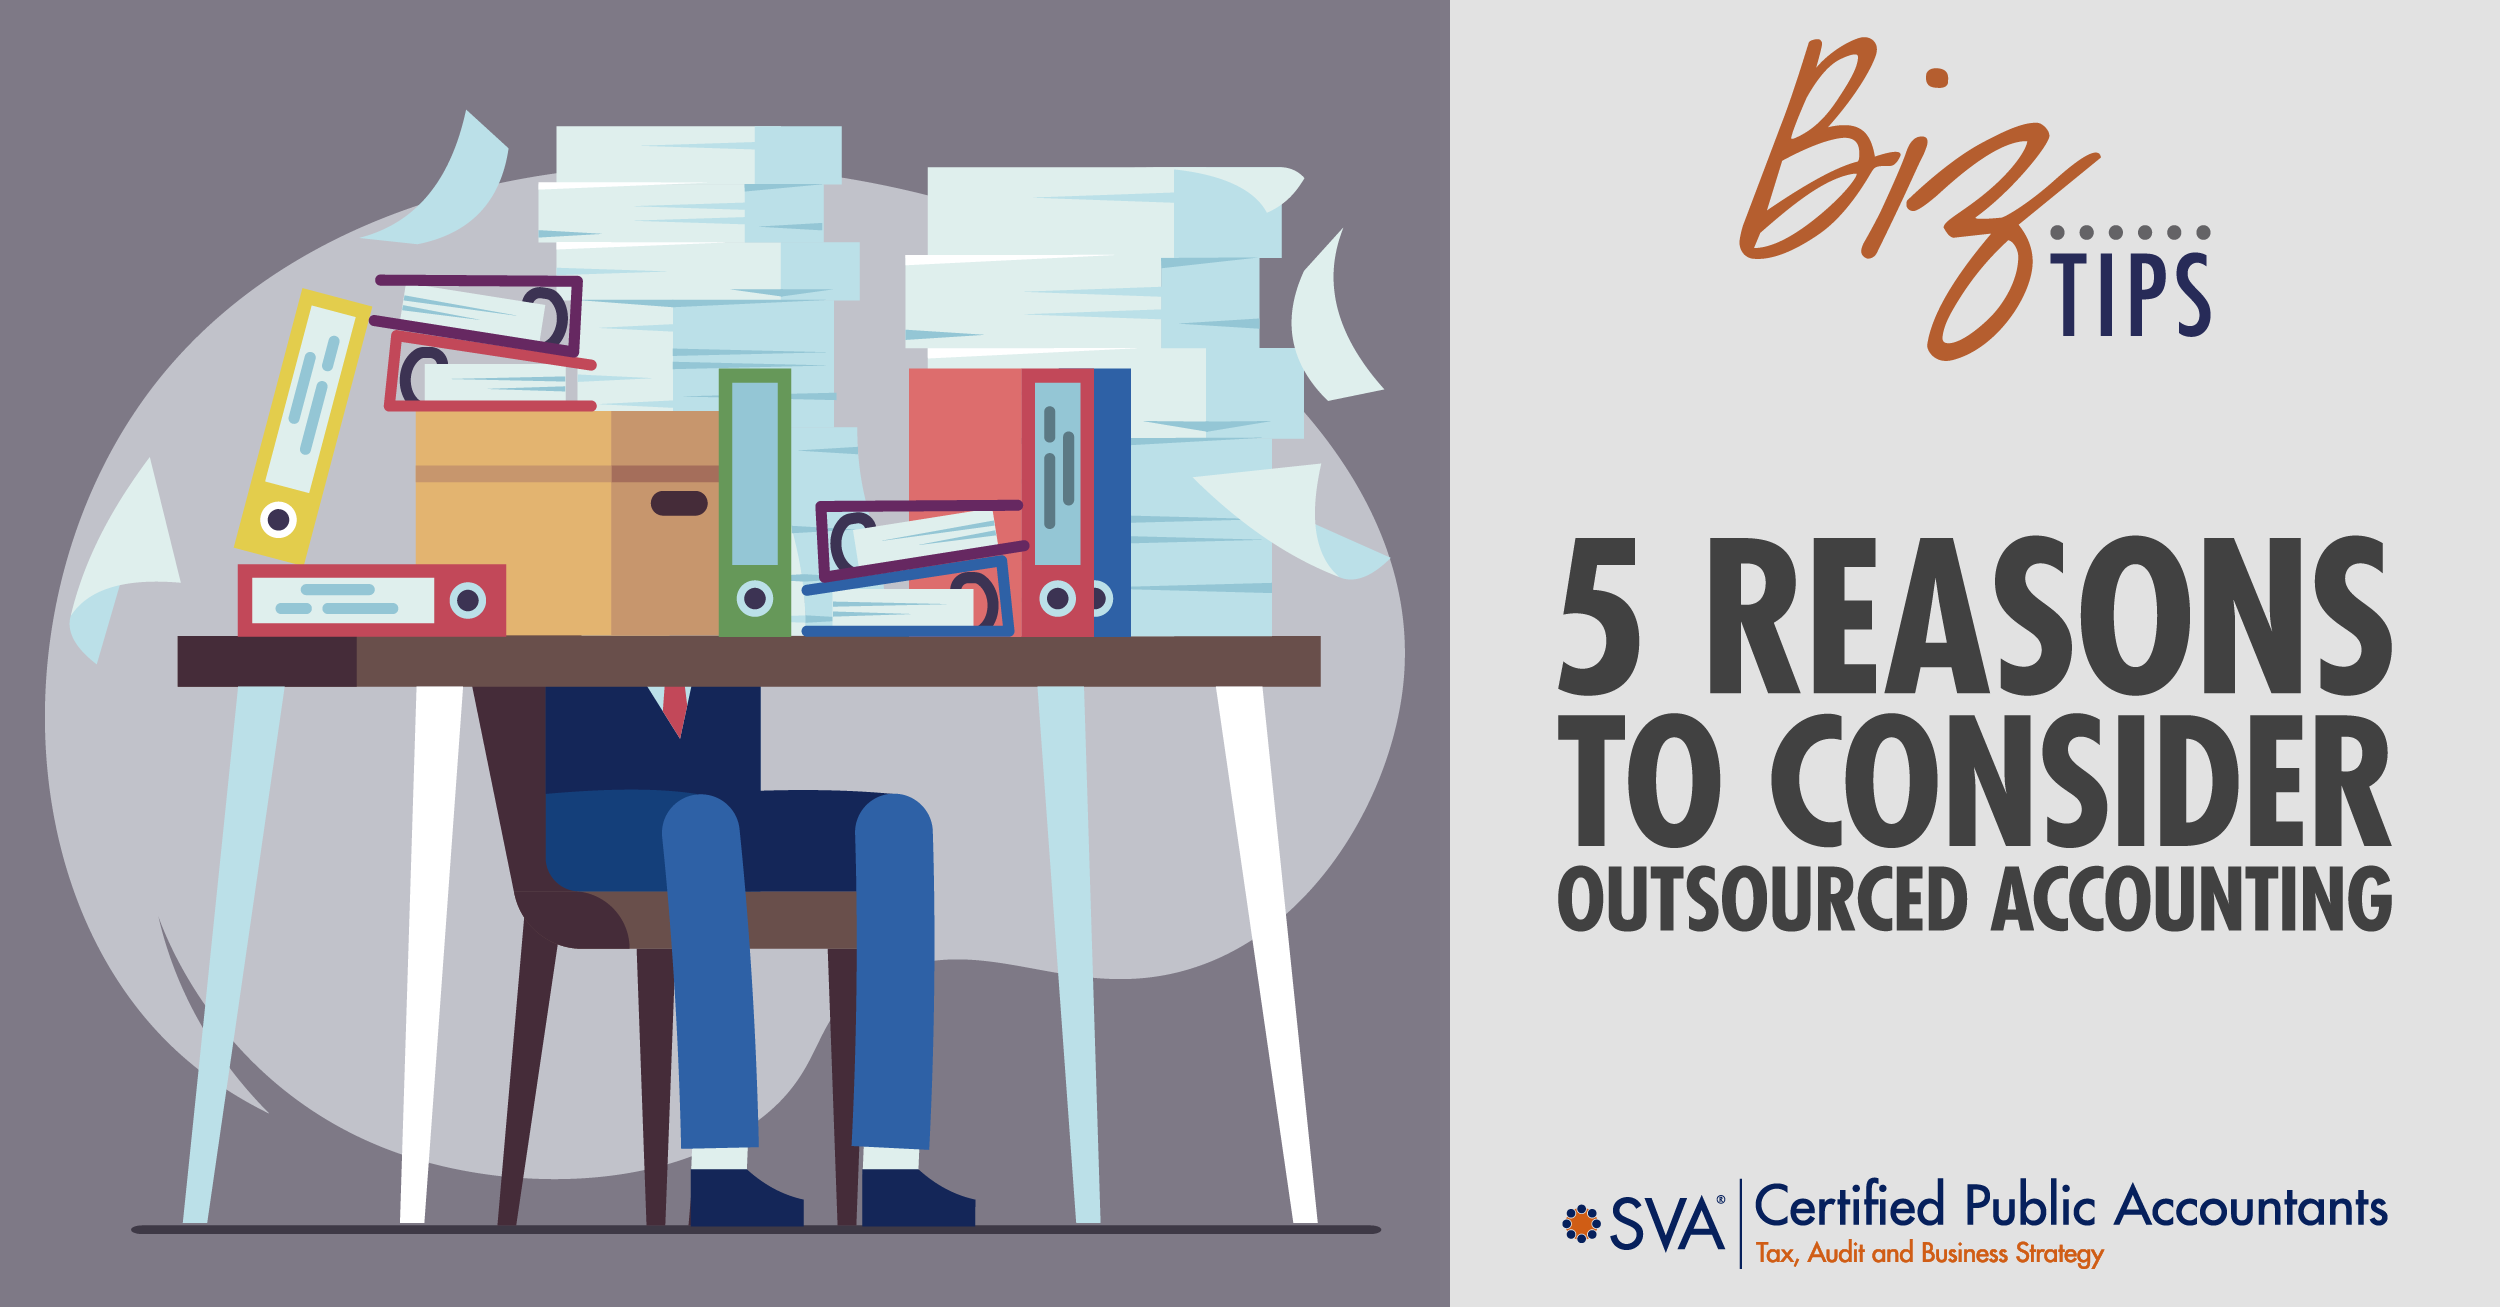 5 Reasons to Consider Outsourced Accounting